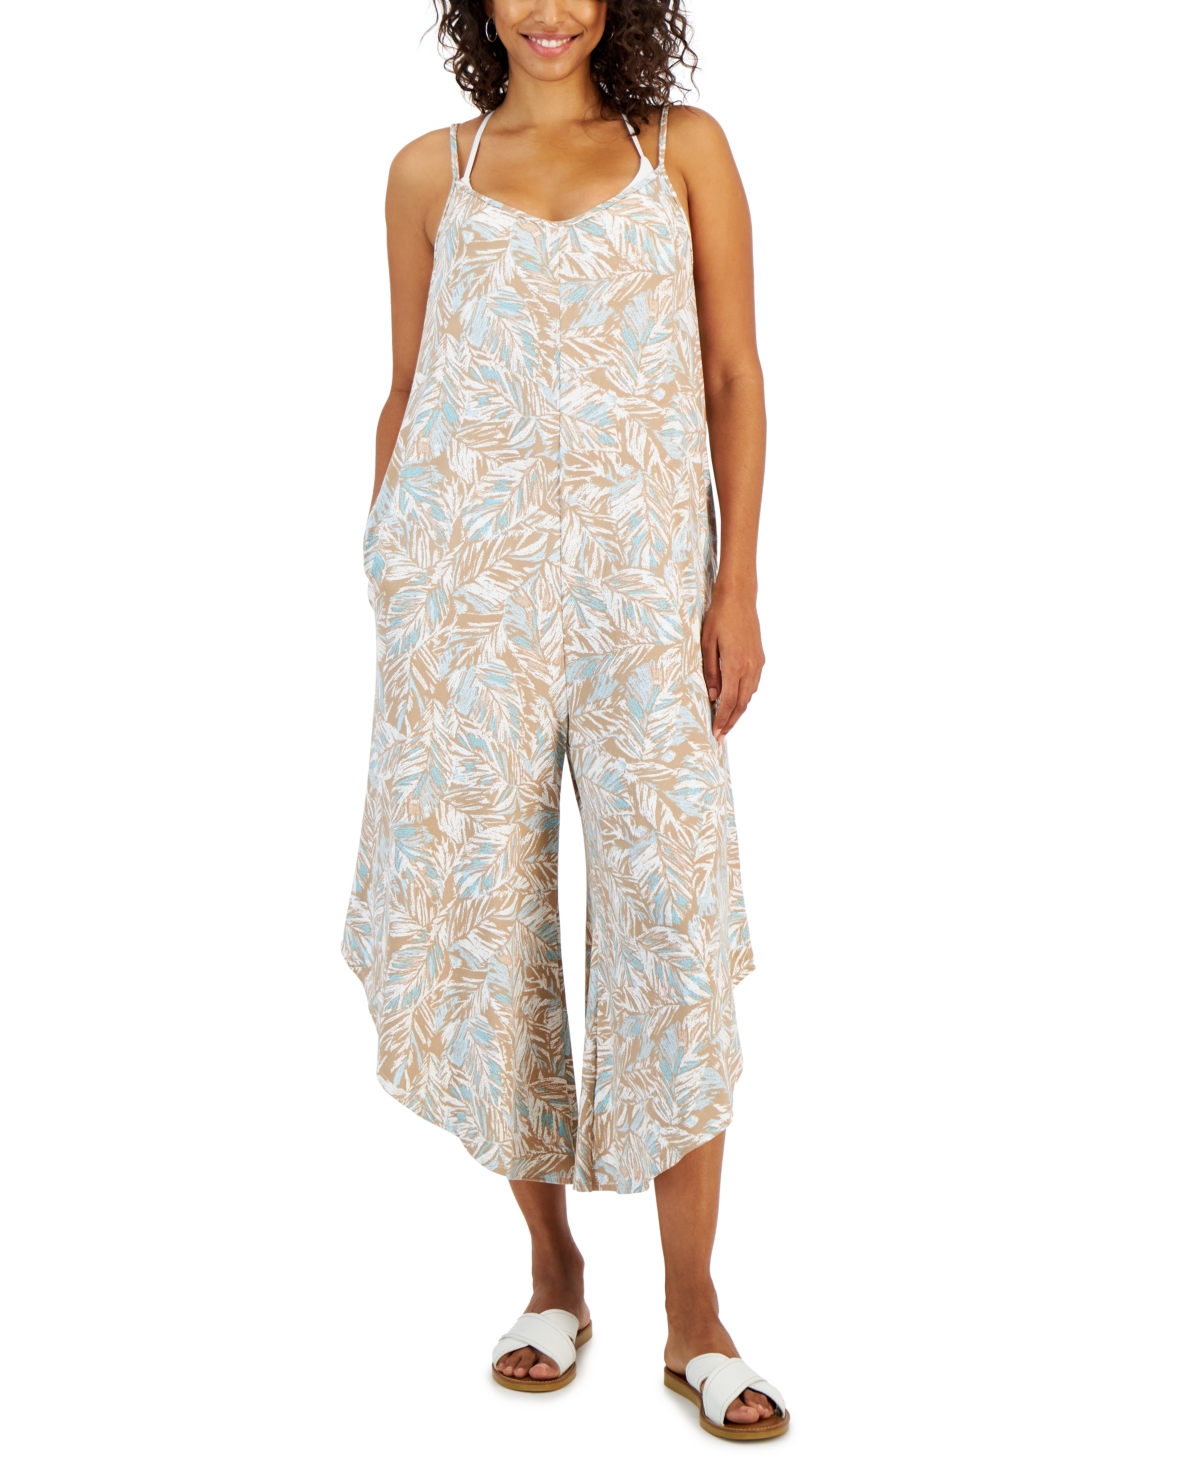 Women's Flowy Botanical-Print Cover-Up Jumper - Taupe/teal/white